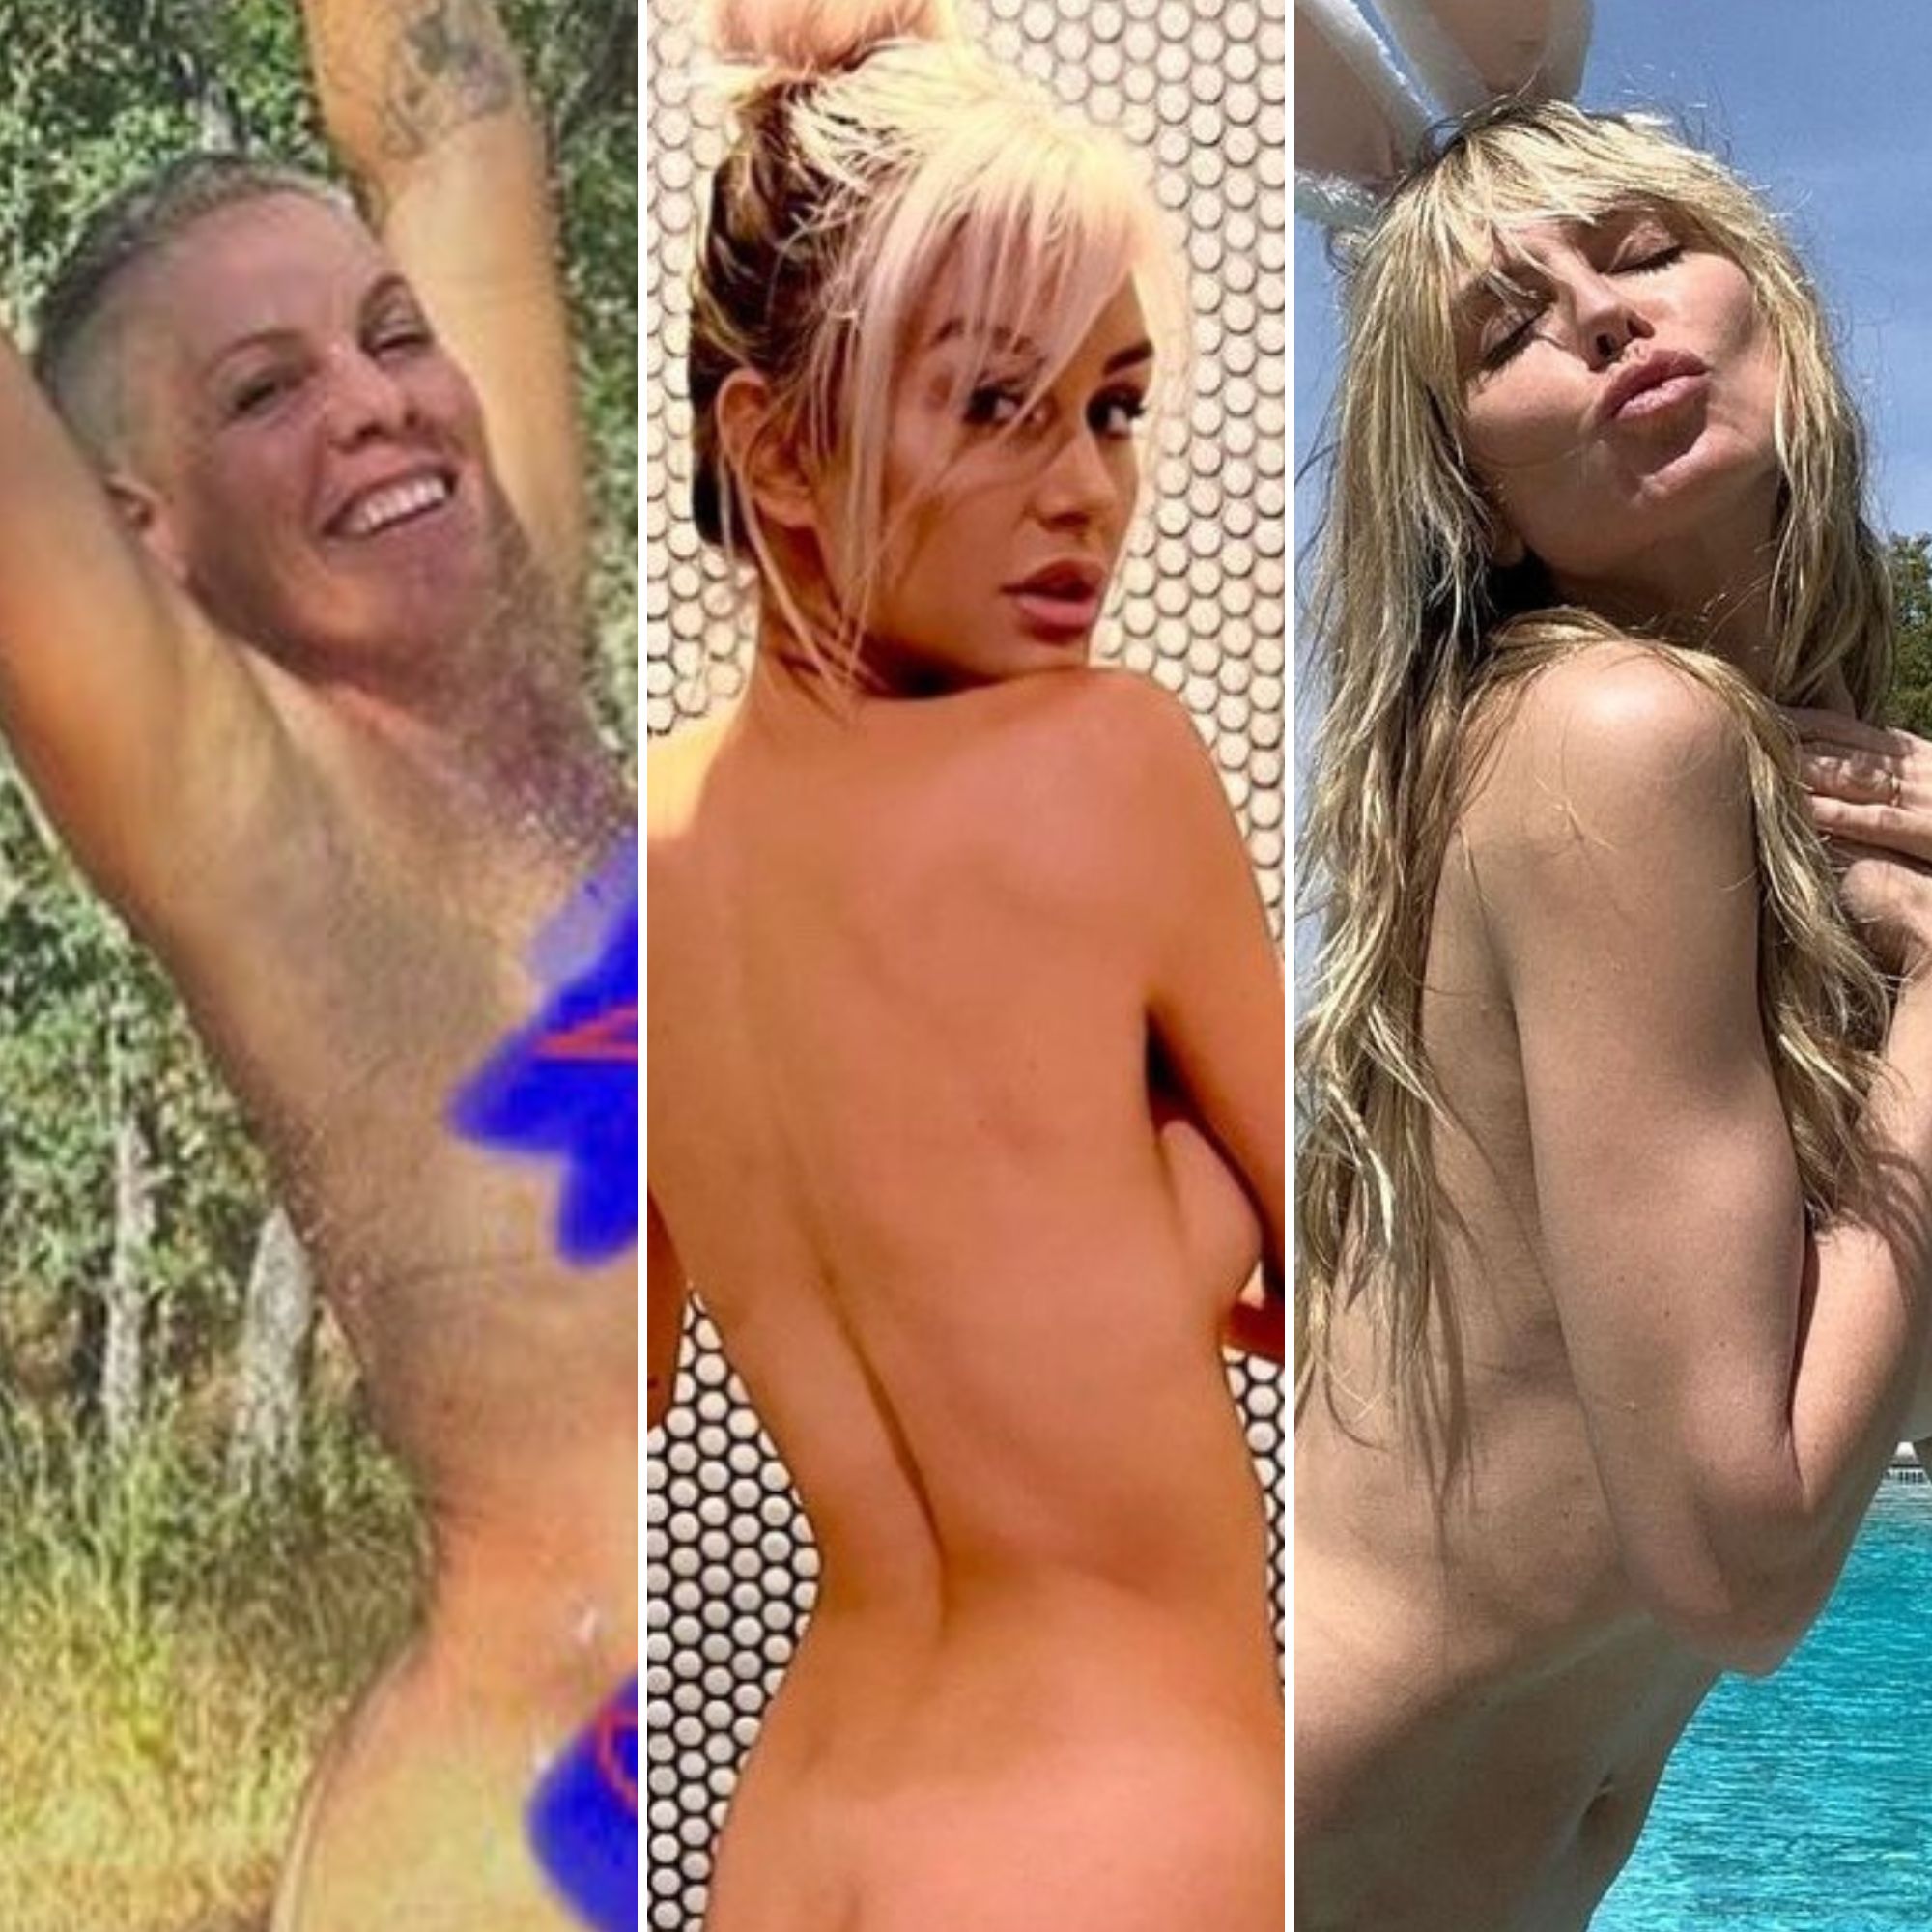 dawn stebbins share nudes of famous girls photos